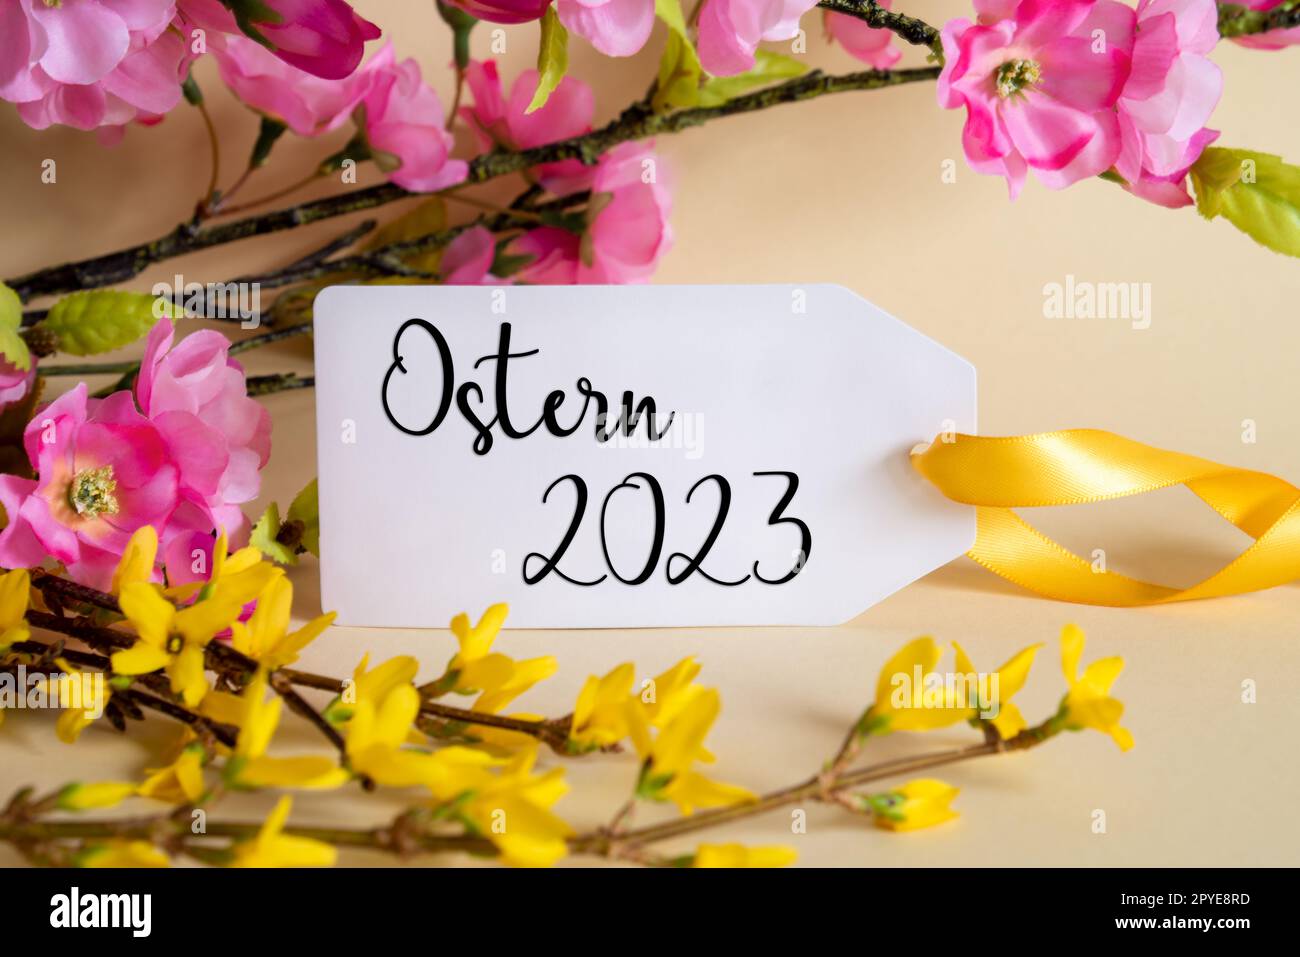 Spring Flower Decoration, Label With Ostern 2023 Means Easter 2023 Stock Photo